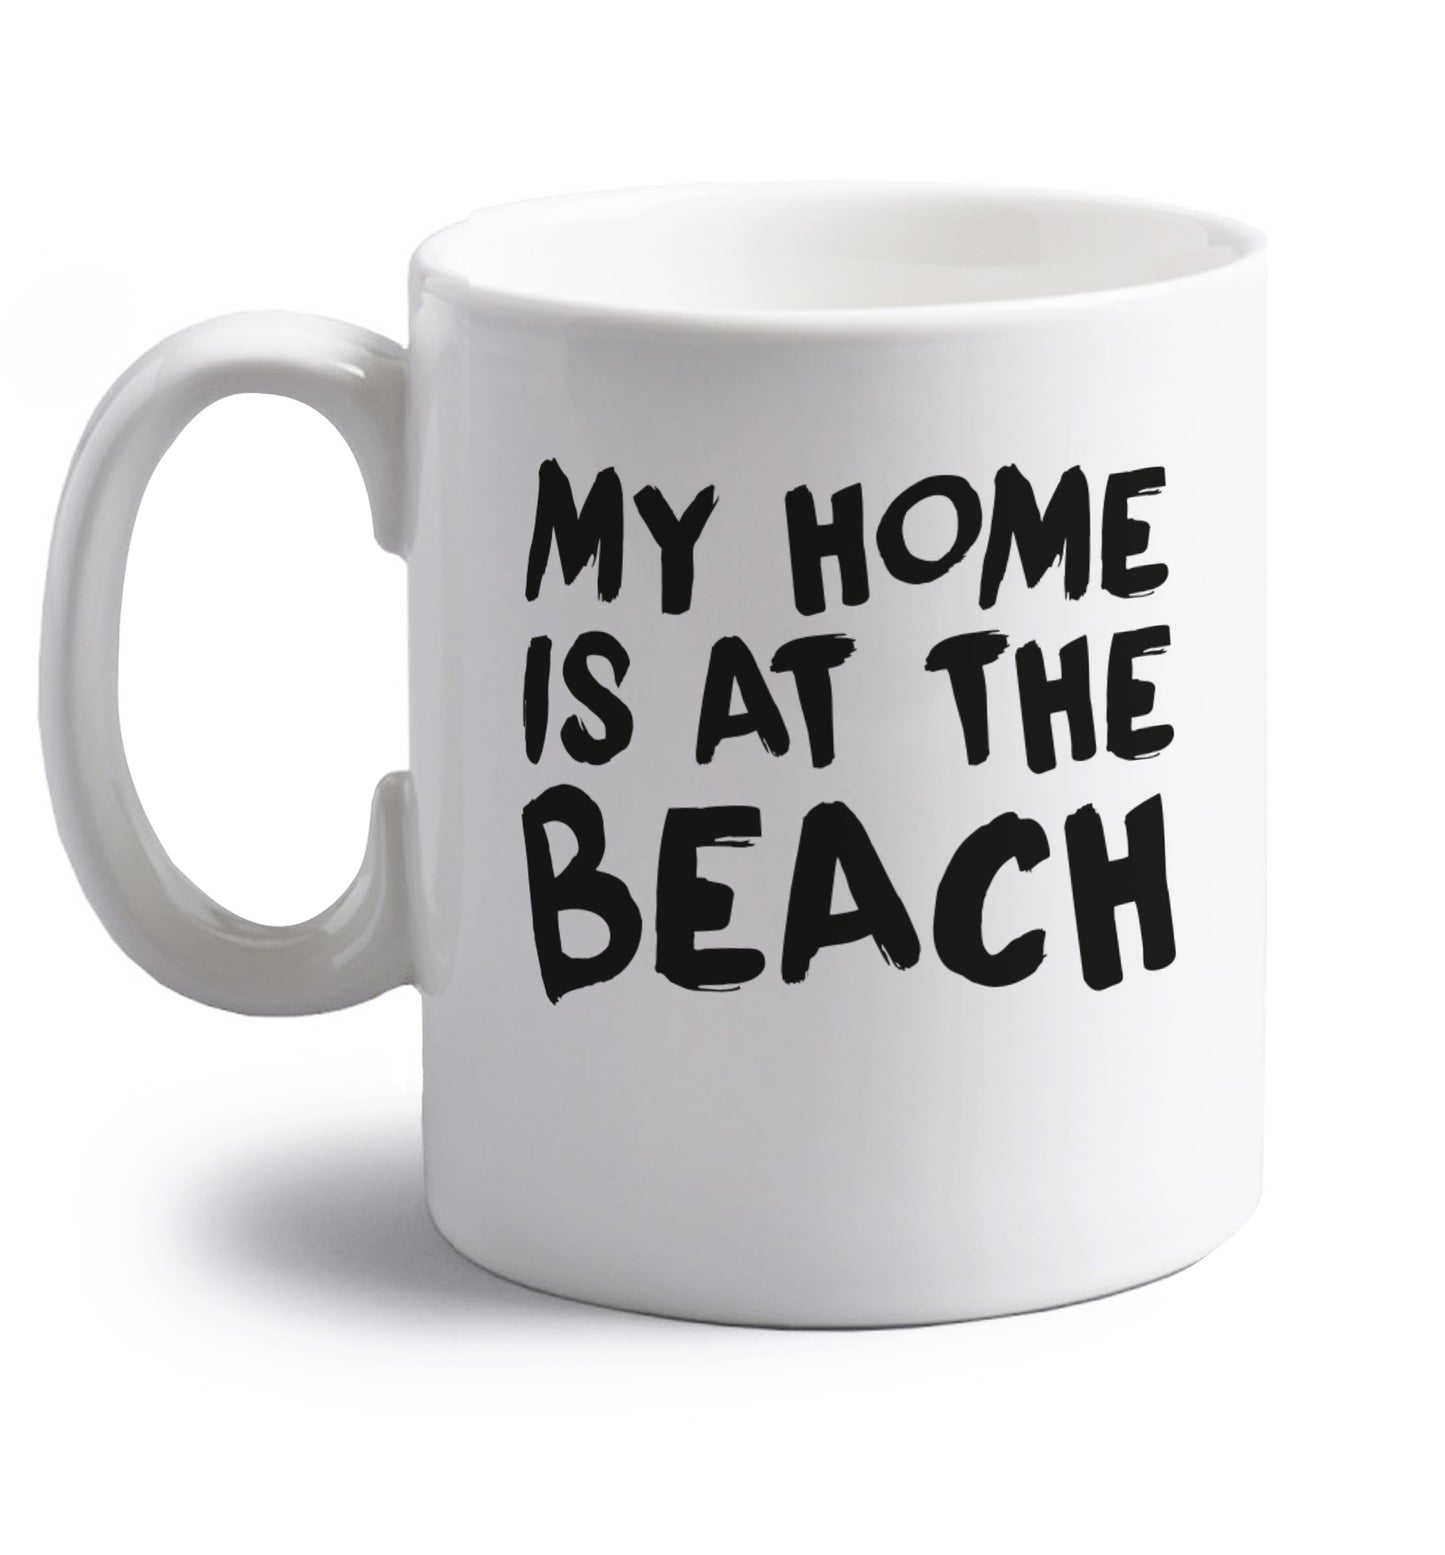 My home is at the beach right handed white ceramic mug 